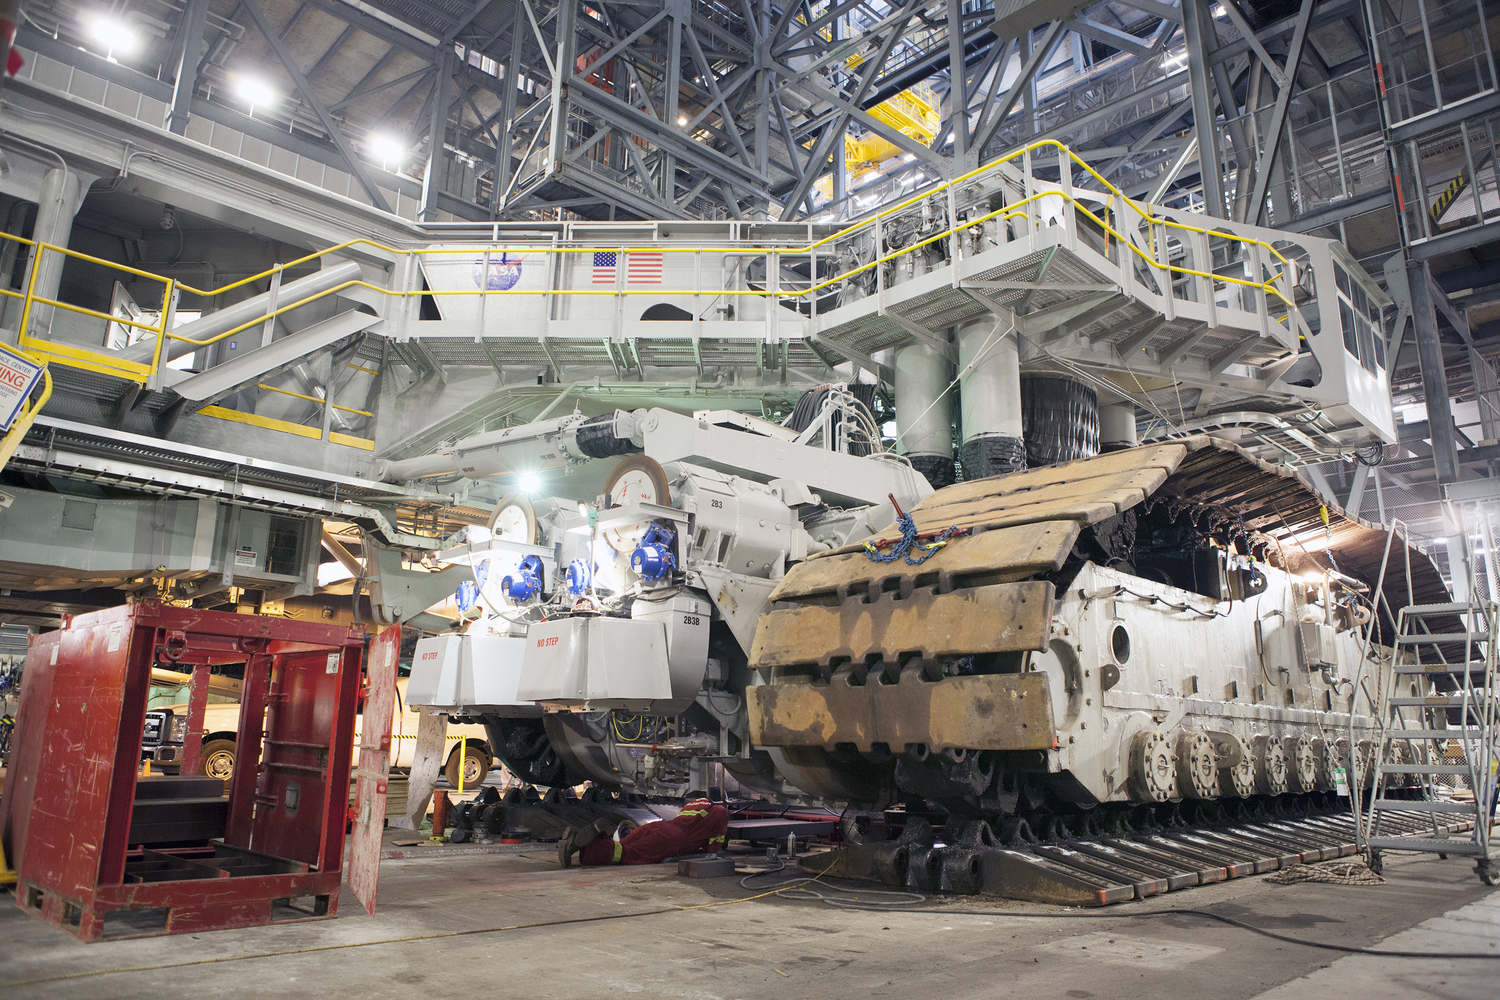 Inside the Vehicle Assembly Building at NASA’s Kennedy Space Center in Florida, the B and D truck sections of crawler-transporter 2, or CT-2, are being raised up to prepare for installation of new roller bearing assemblies. Work continues in high bay 2 to upgrade CT-2. The modifications are designed to ensure CT-2’s ability to transport launch vehicles currently in development, such as the agency’s Space Launch System, to the launch pad. Photo Credit: NASA / Dimitri Gerondidakis